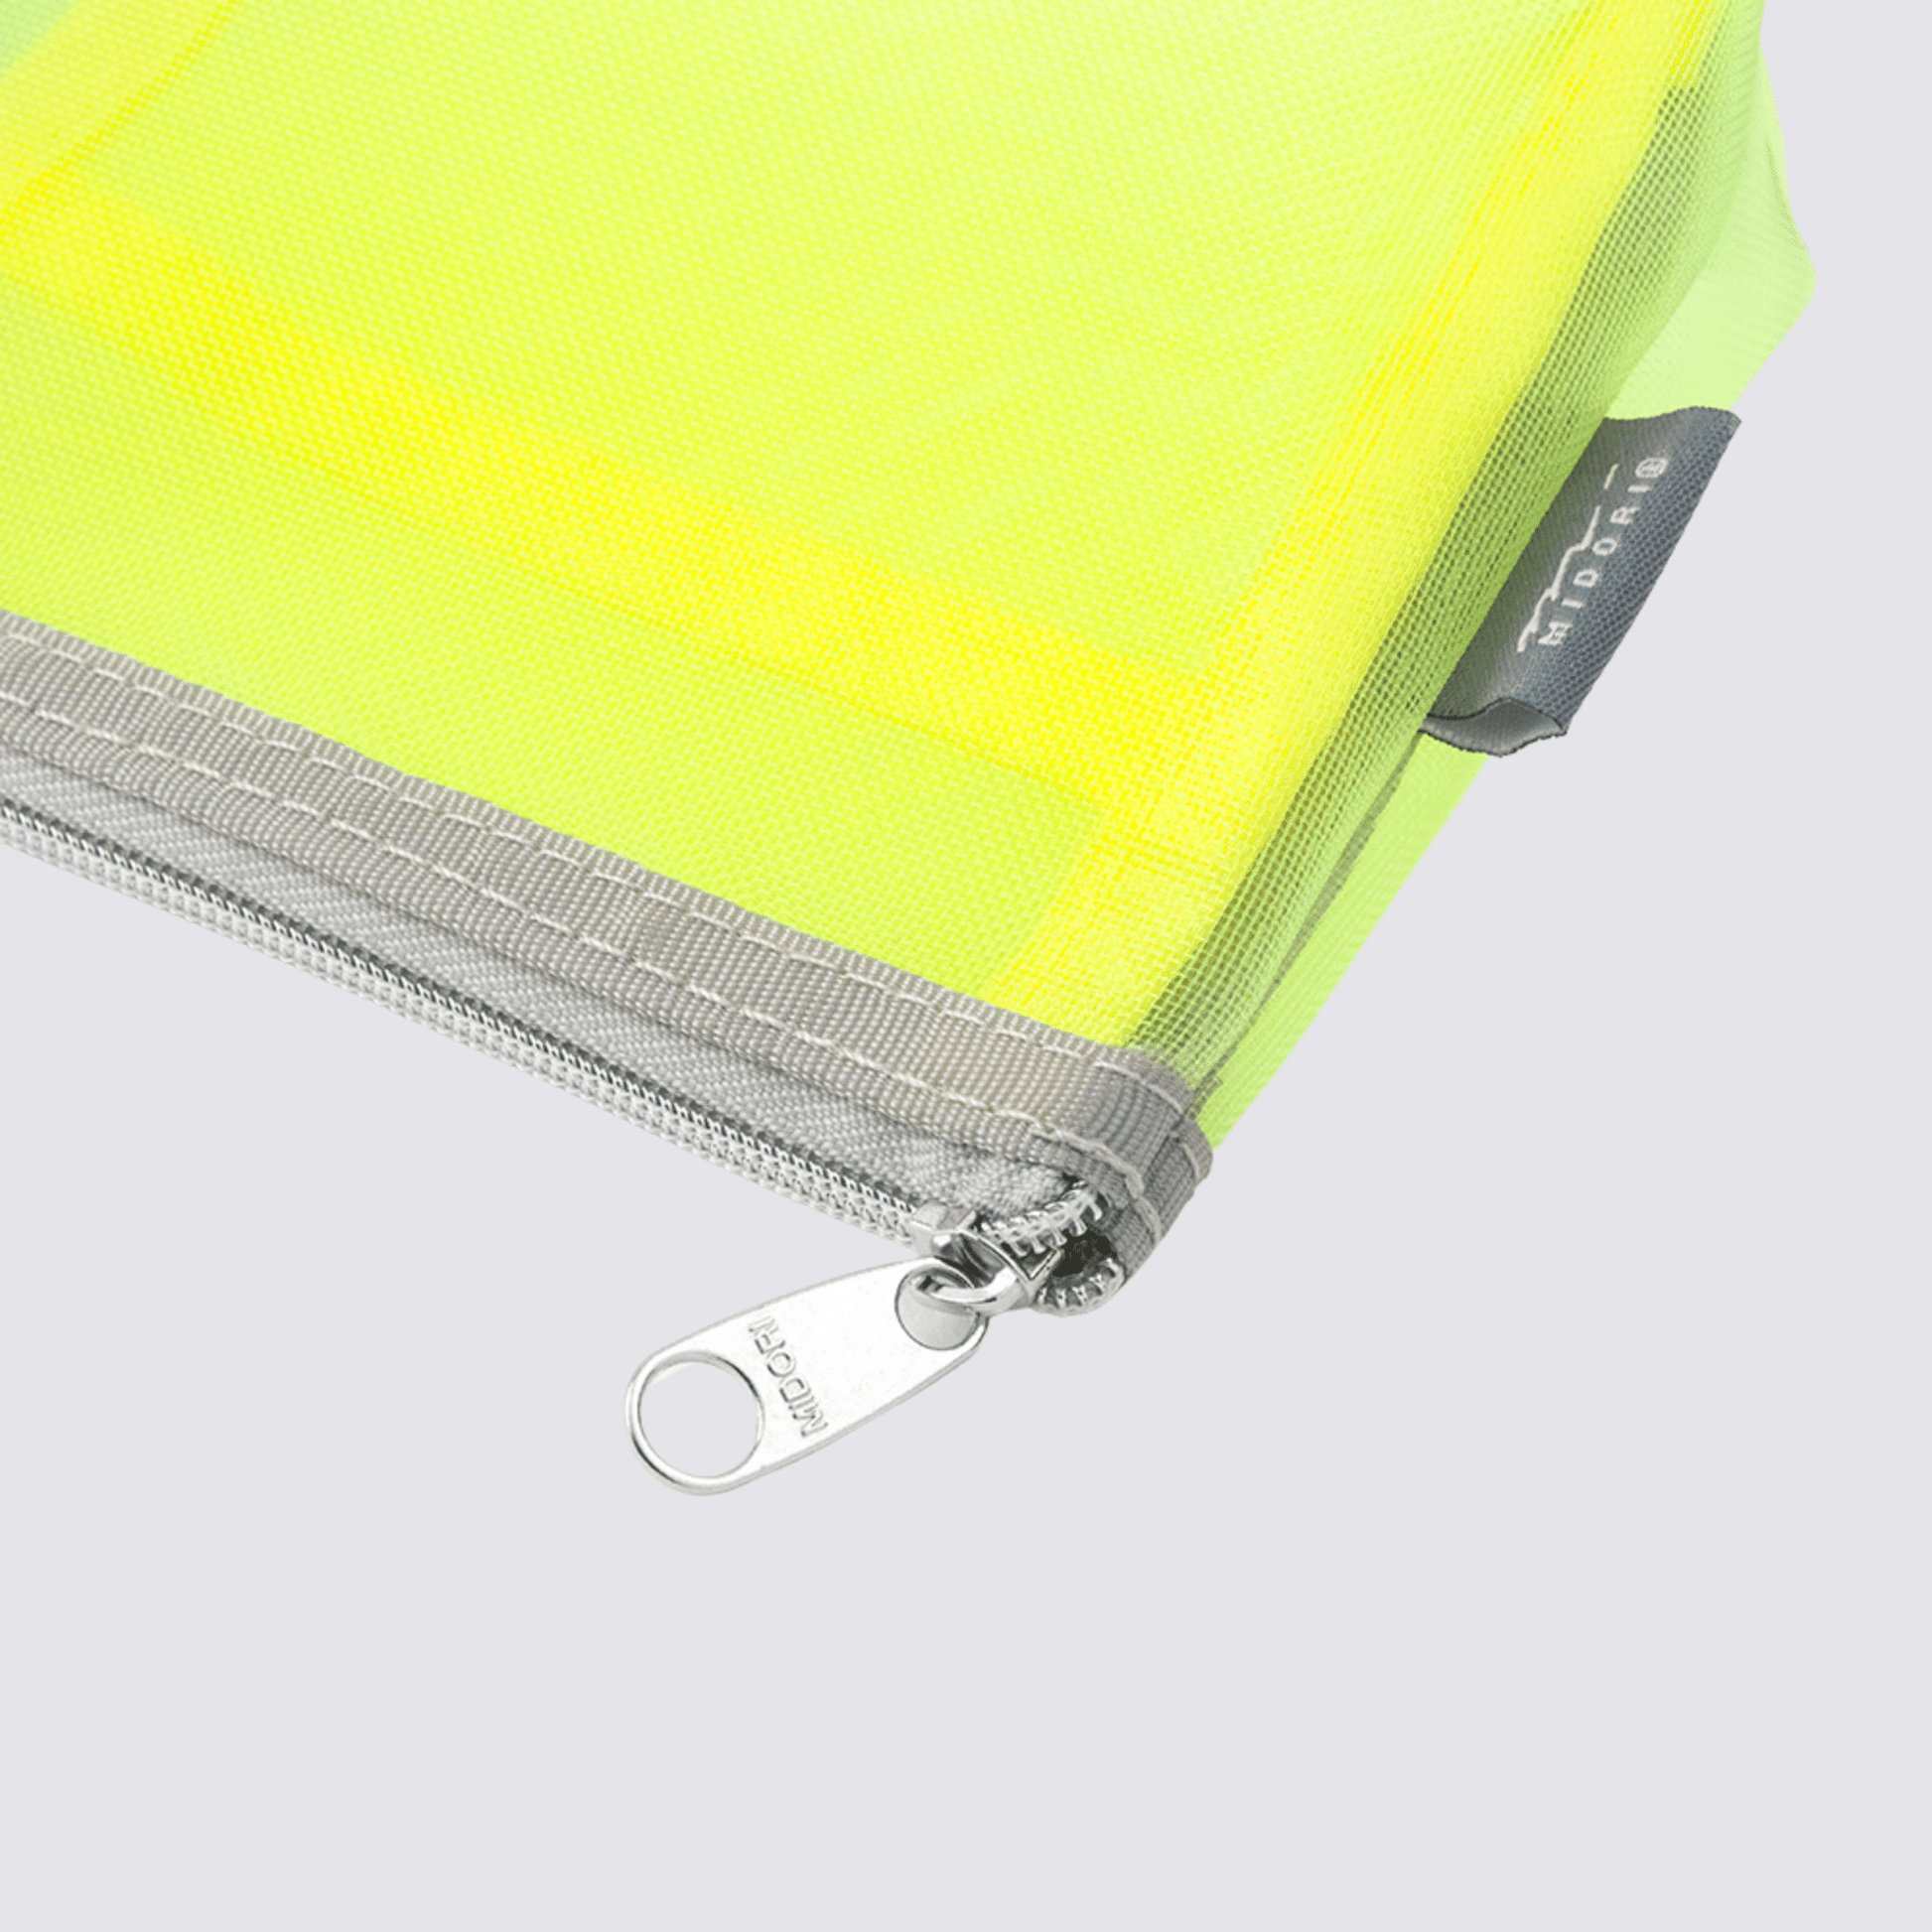 Mesh Neon Yellow and Gray Pencil Case